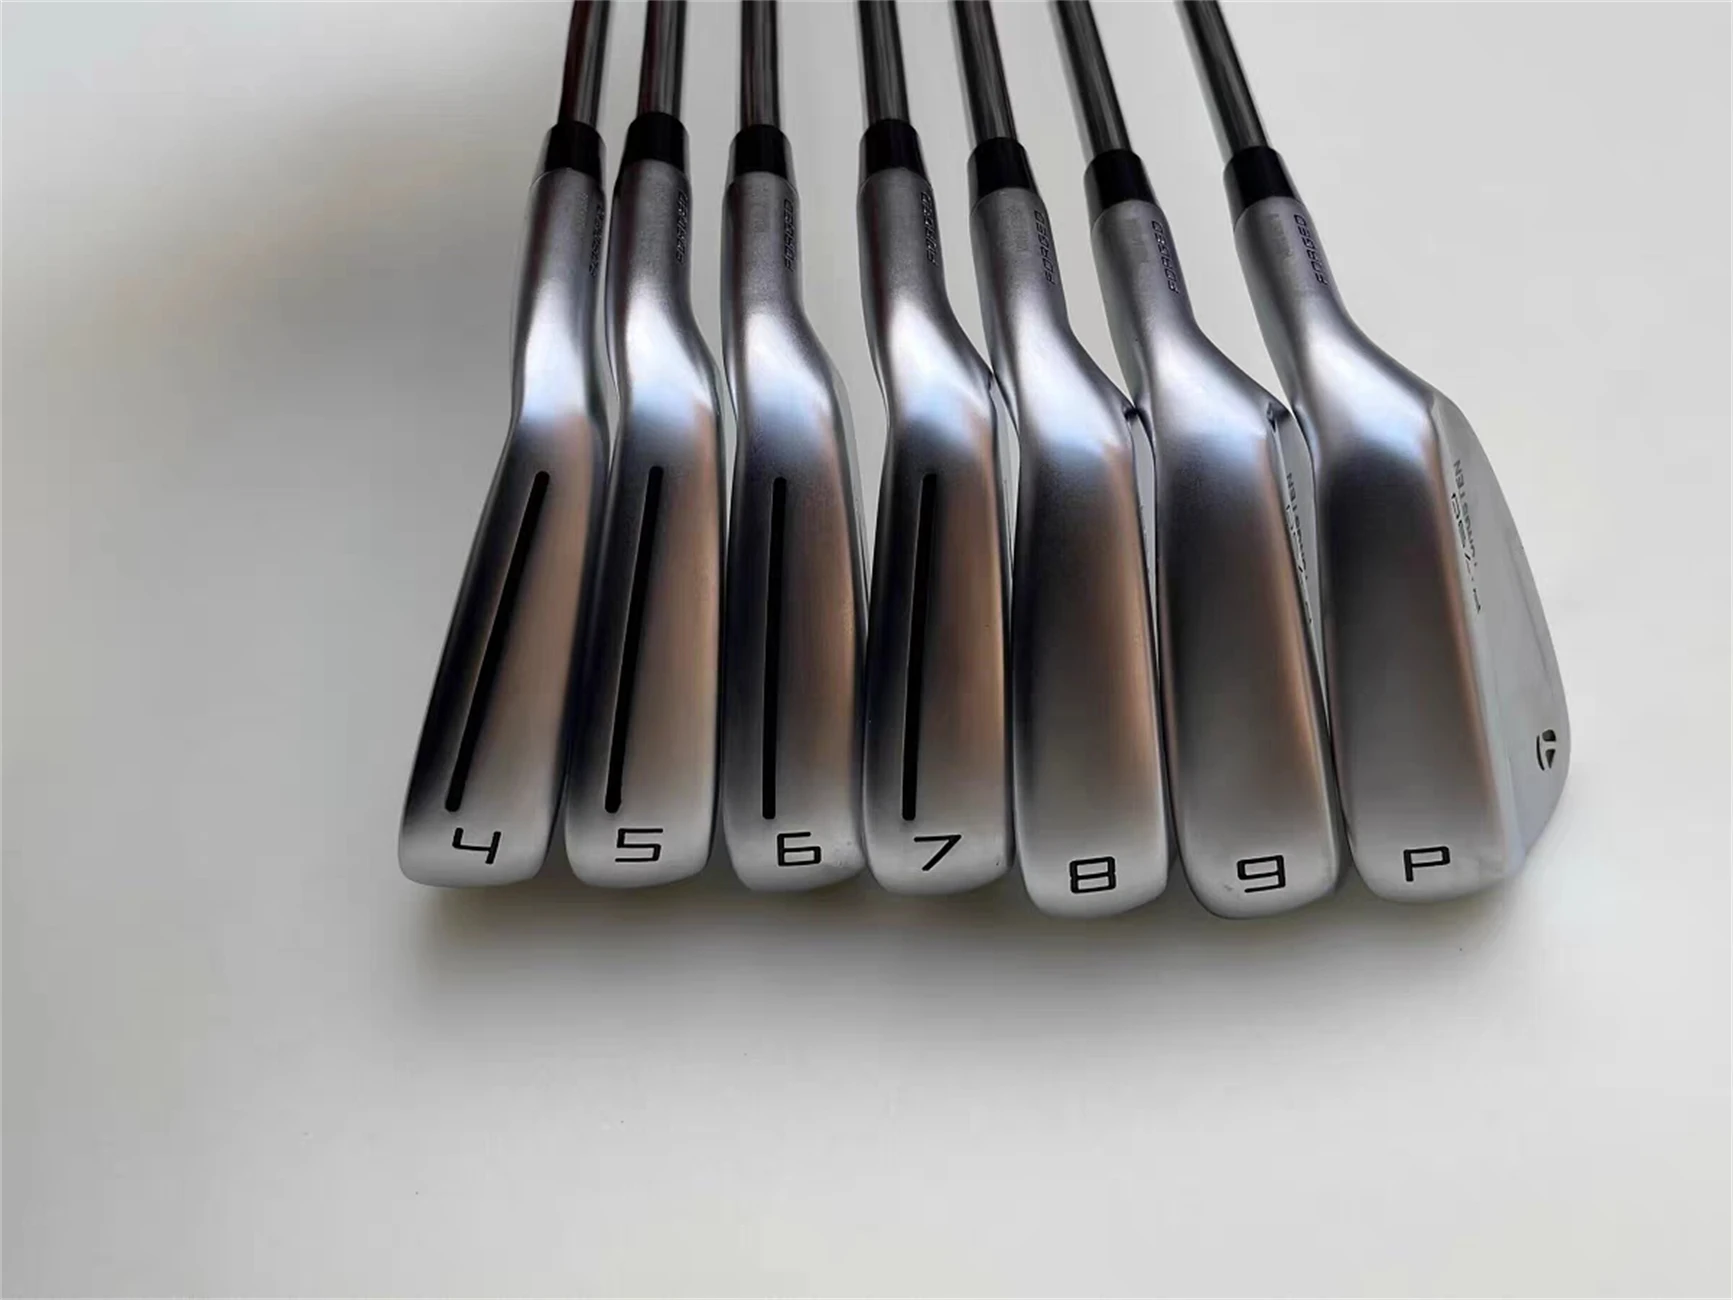 

7PCS 2021 Golf Clubs TP790 Forged Golf Irons Set Club Golf 4-9P Regular/Stiff Steel/Graphite Shafts Headcovers Fast Shipping